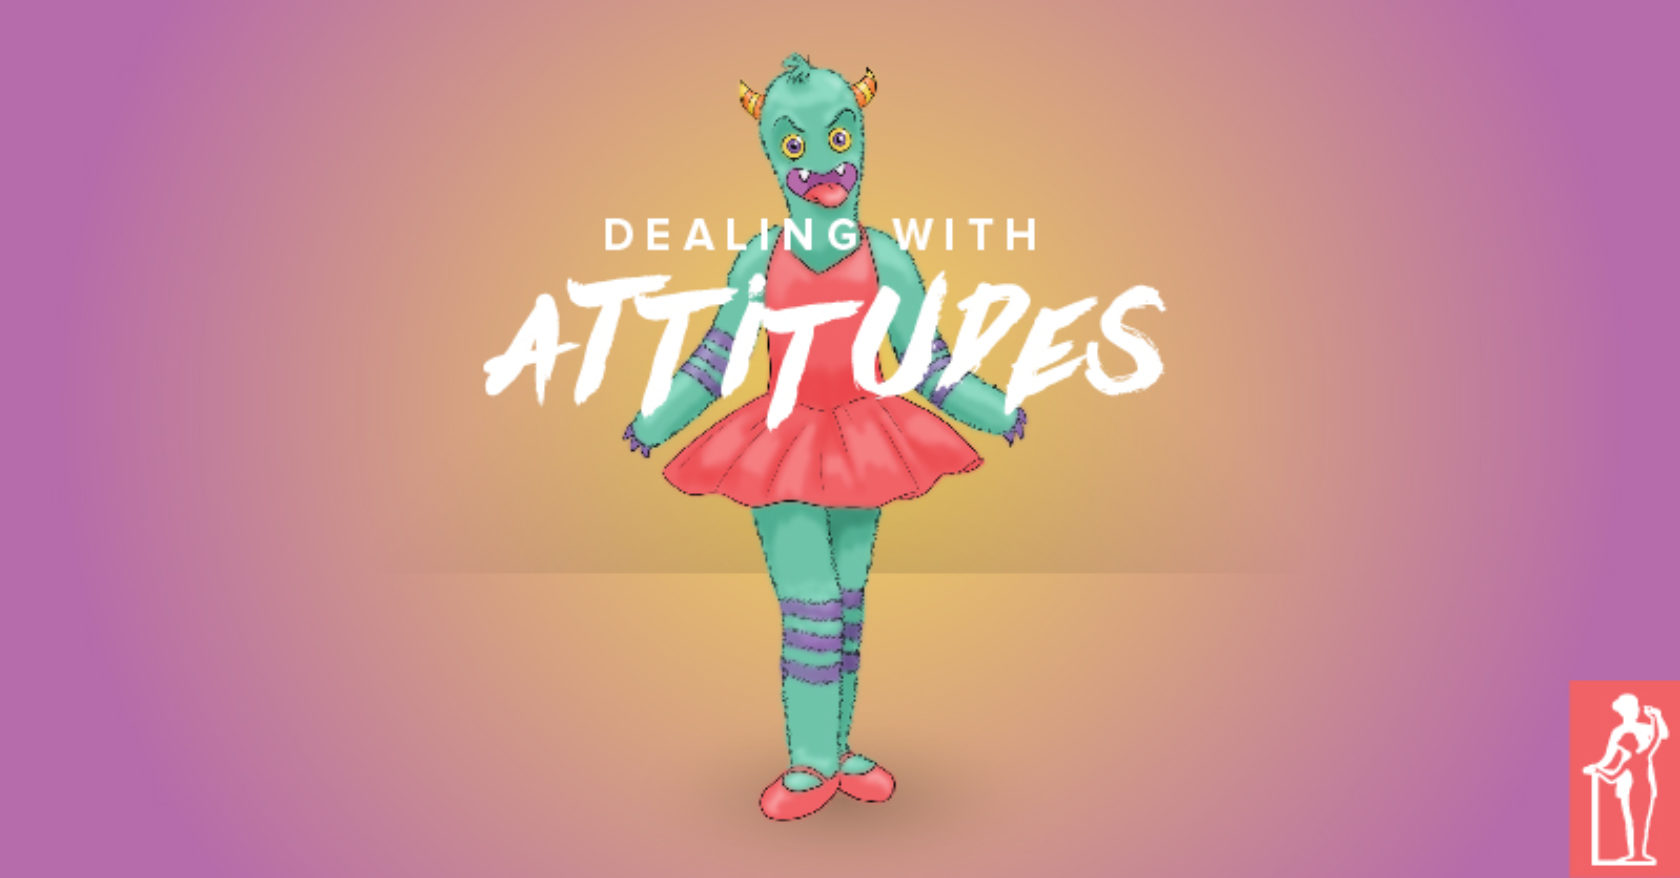 Dealing With Attitudes